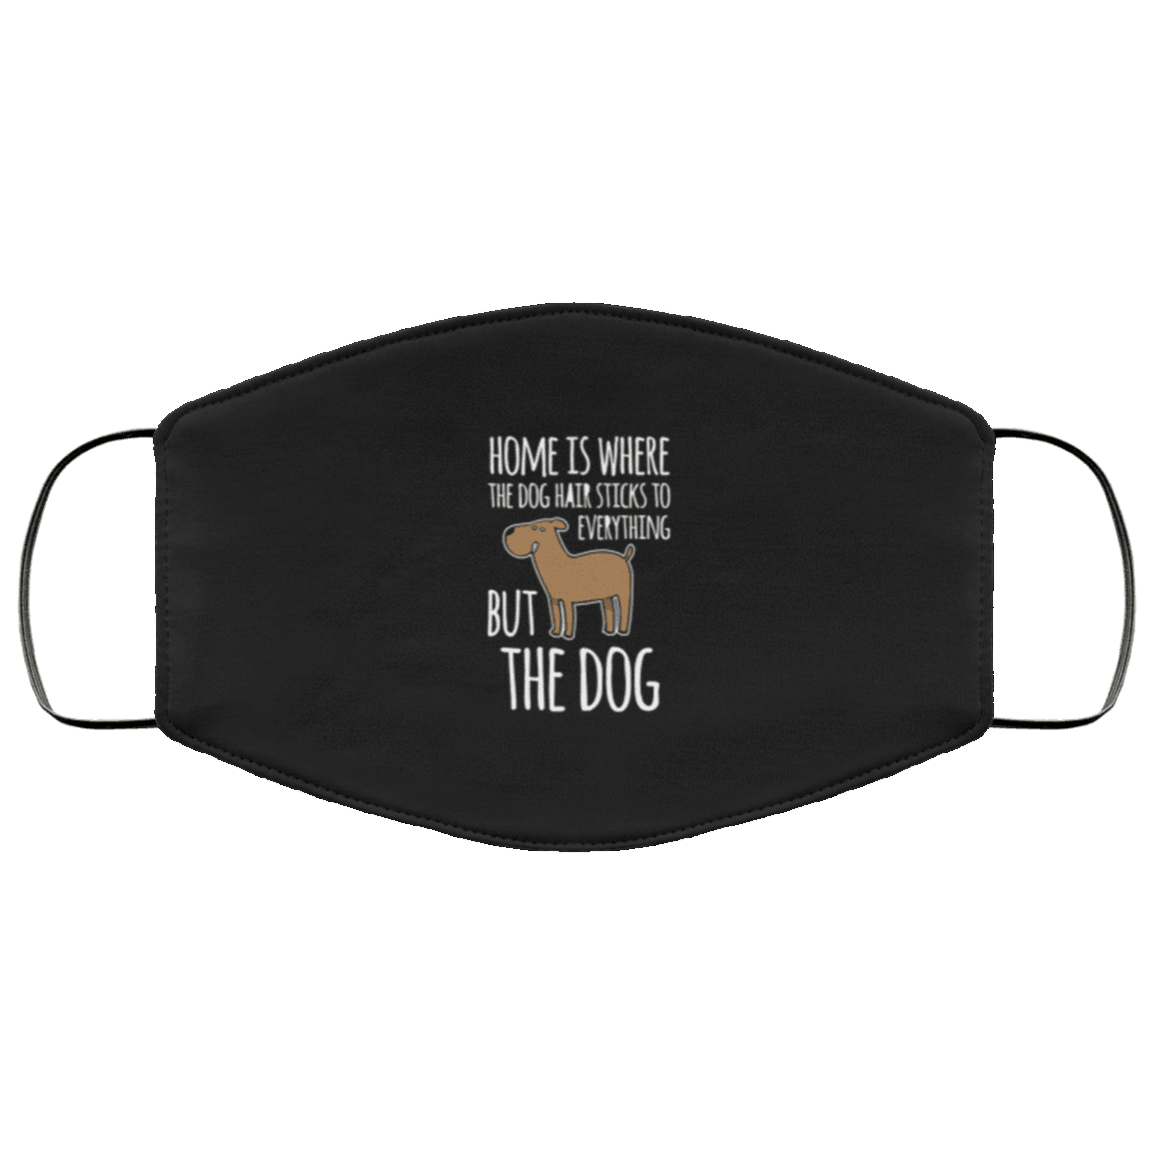 Designs by MyUtopia Shout Out:Home Is Where The Dog Hair Sticks To Everything But The Dog Humor Adult Fabric Face Mask with Elastic Ear Loops,3 Layer Fabric Face Mask / Black / Adult,Fabric Face Mask